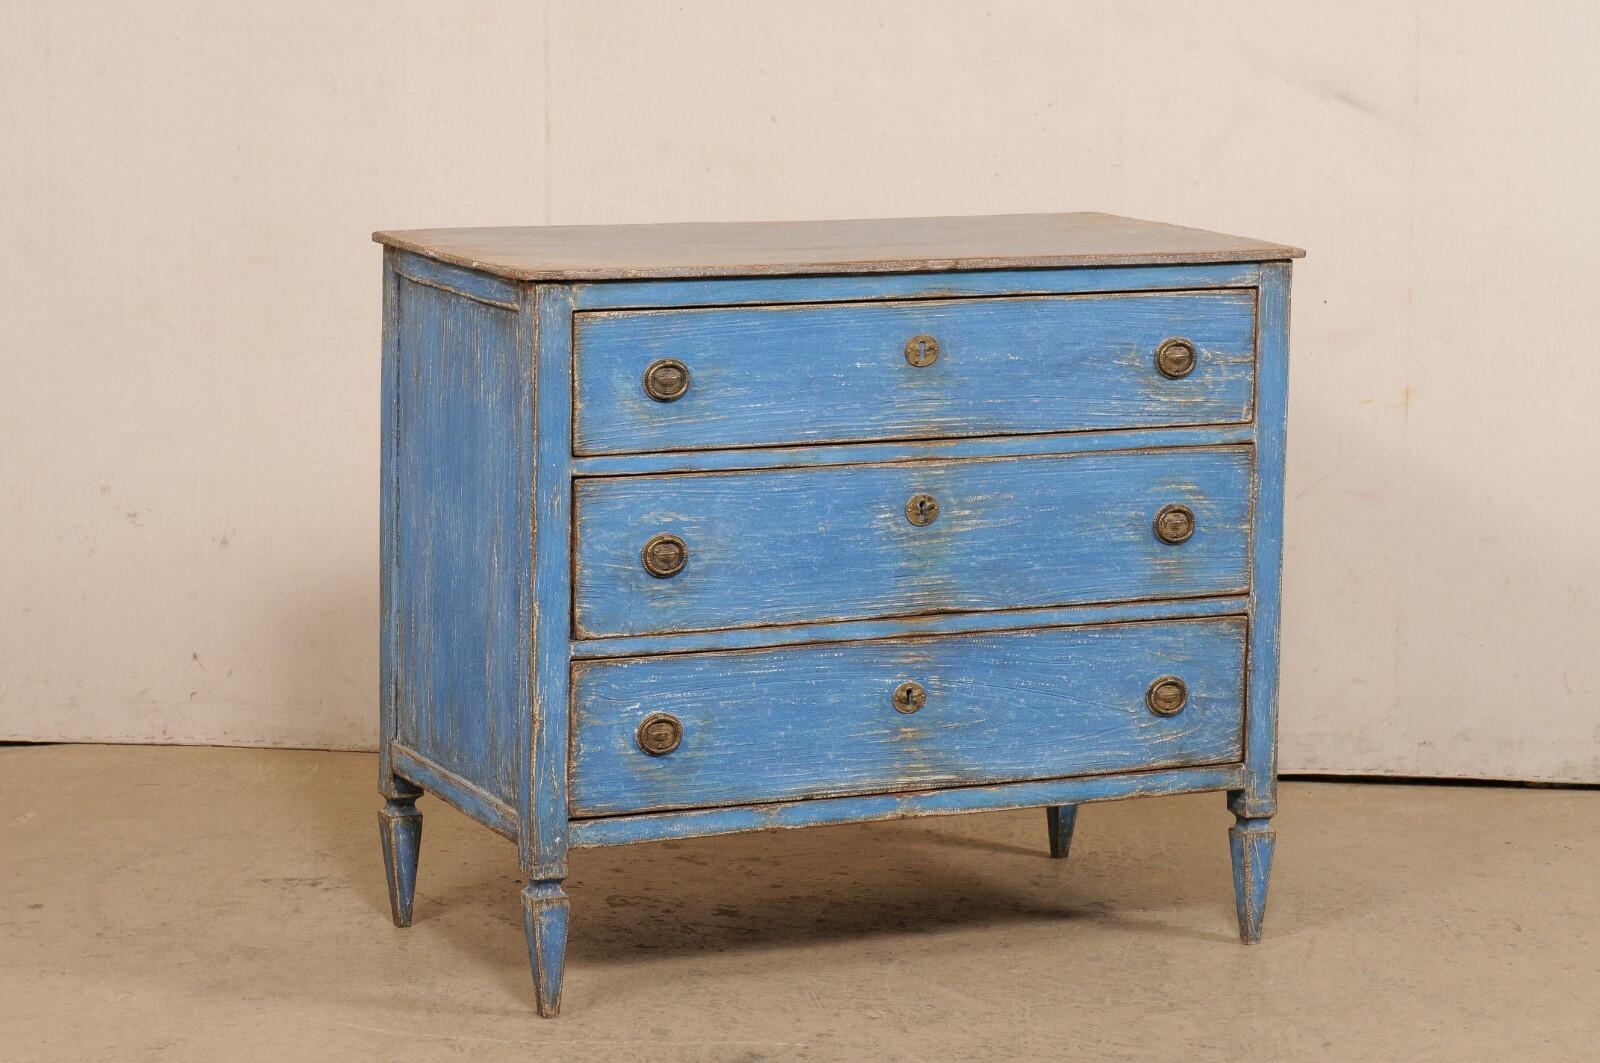 A French painted wood commode from the early 20th century. This antique chest of drawers from France has a rectangular-shaped top which slightly overhangs the case below which houses three graduated drawers, and is presented upon spaded legs. The